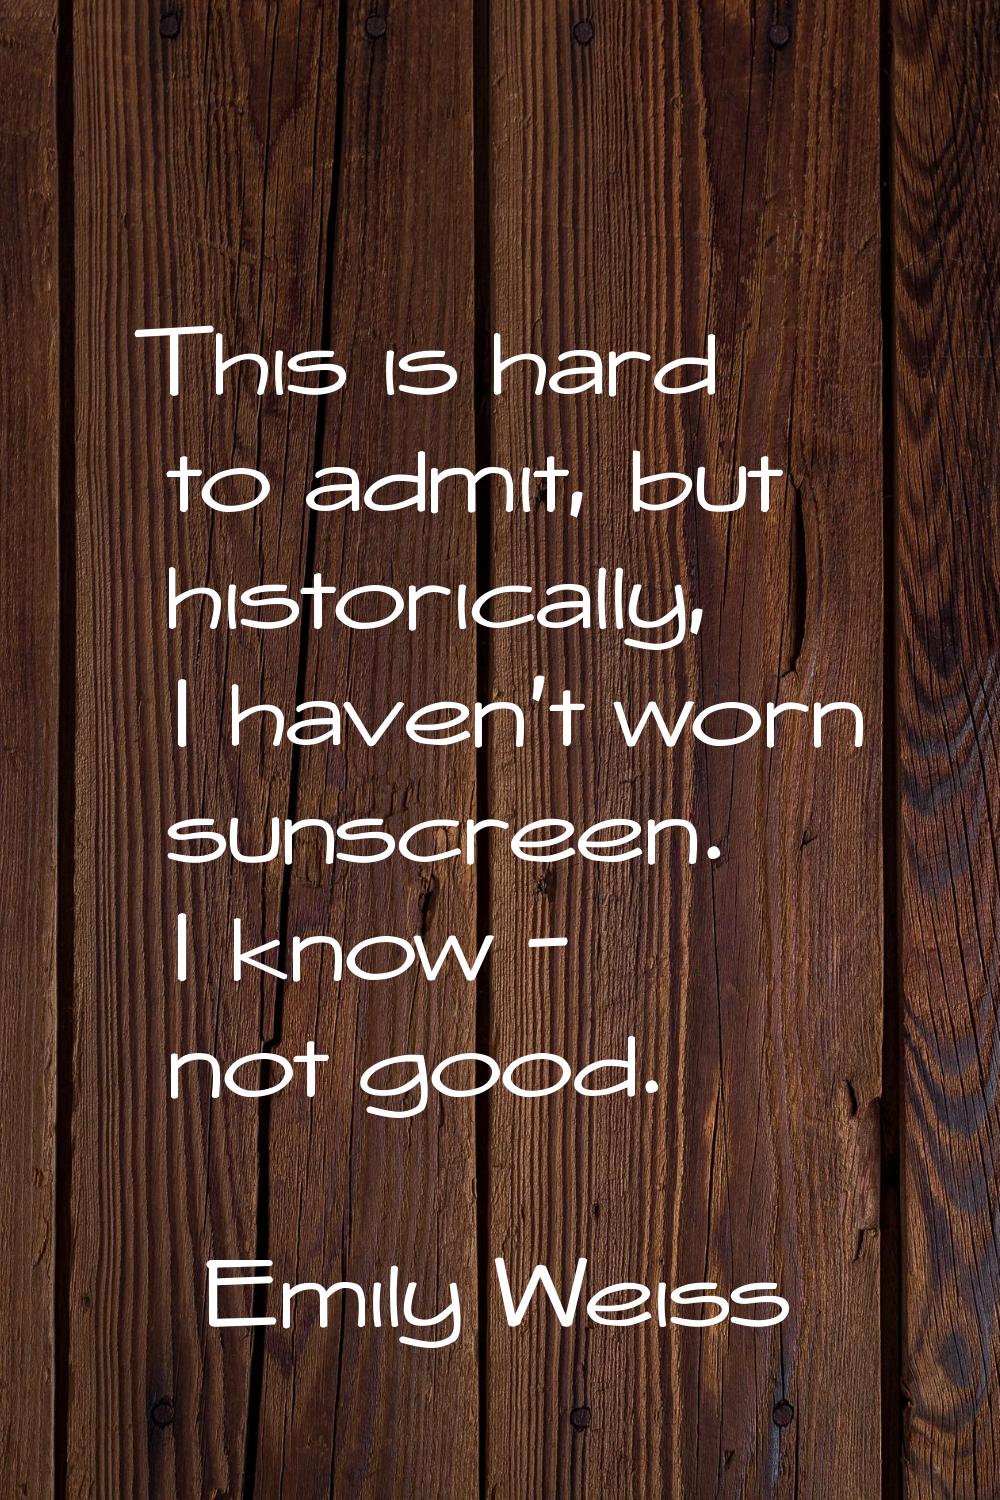 This is hard to admit, but historically, I haven't worn sunscreen. I know - not good.